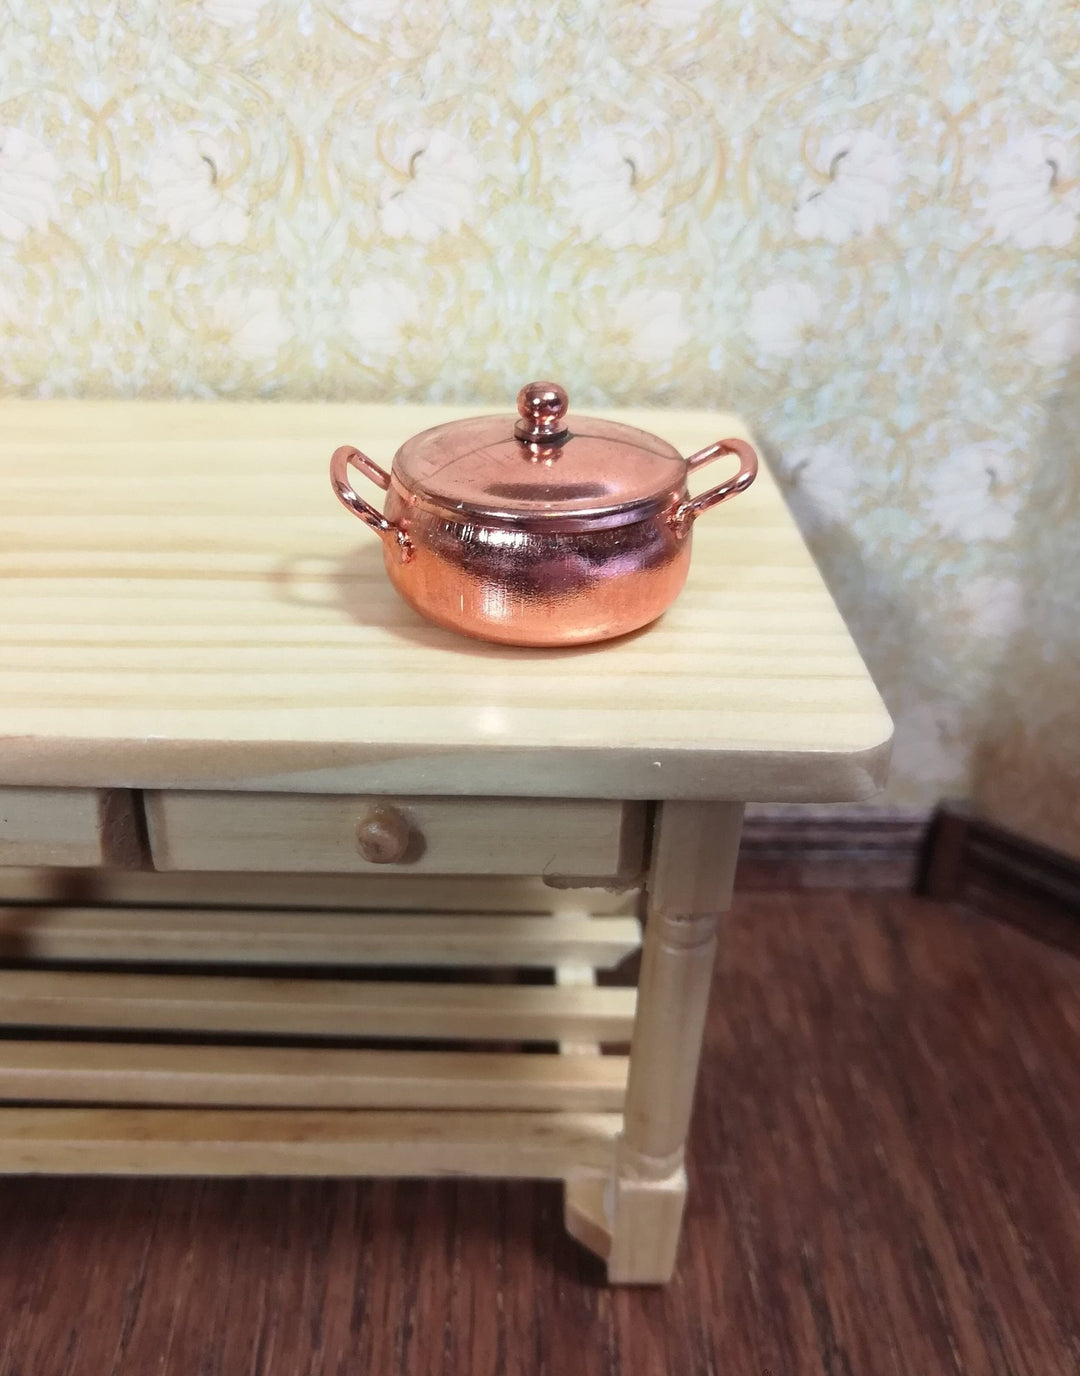 Dollhouse Miniature Copper Cooking Pot Large with Removable Lid 1:12 Scale - Miniature Crush